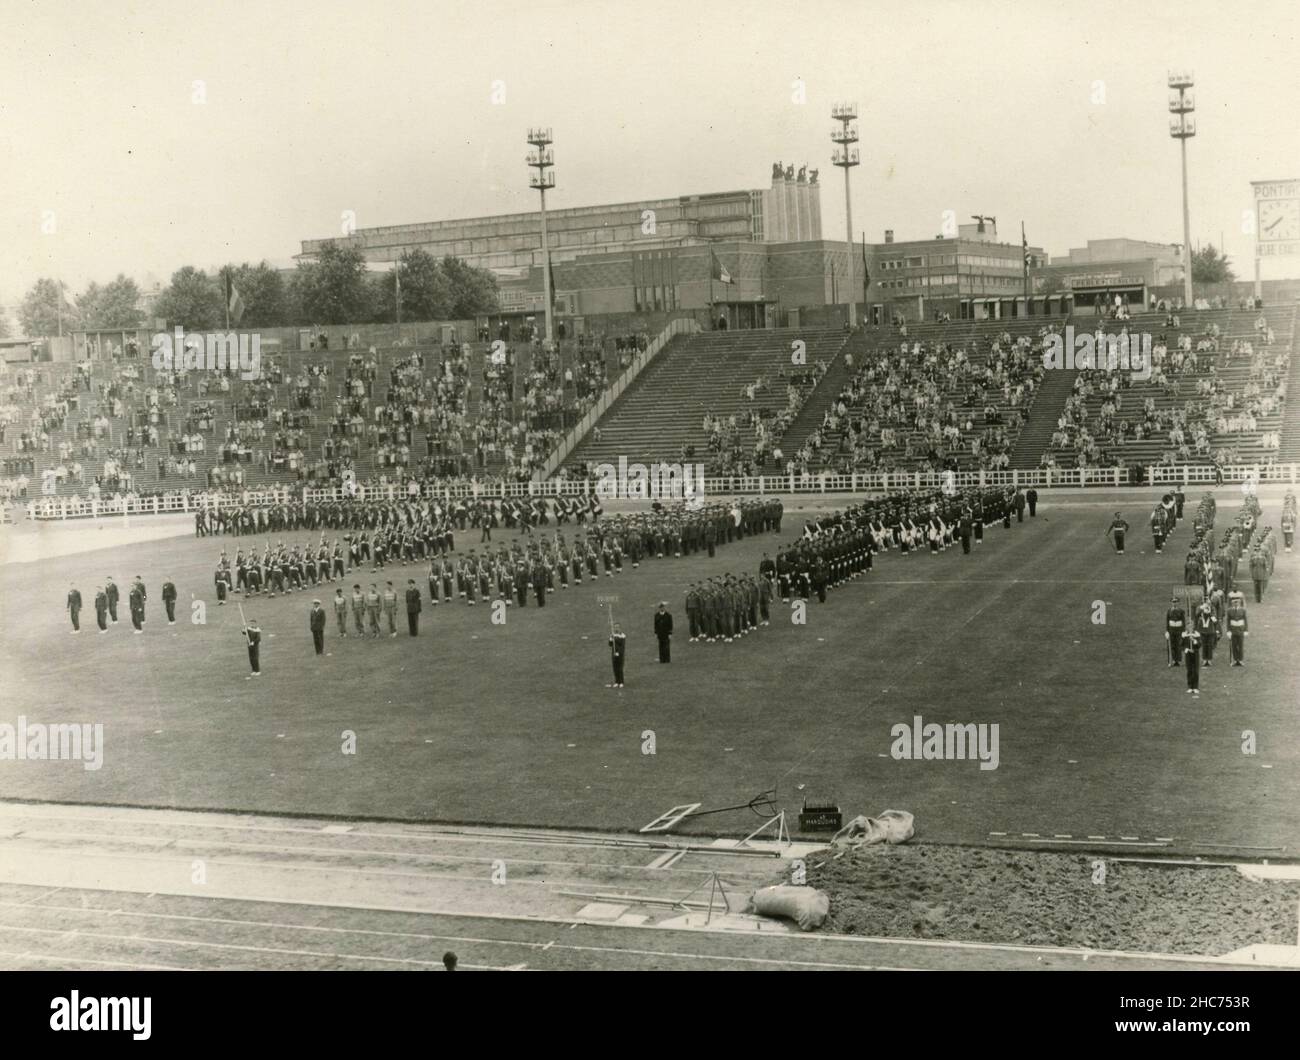 Military lining in a Stadium, USA 1950a Stock Photo